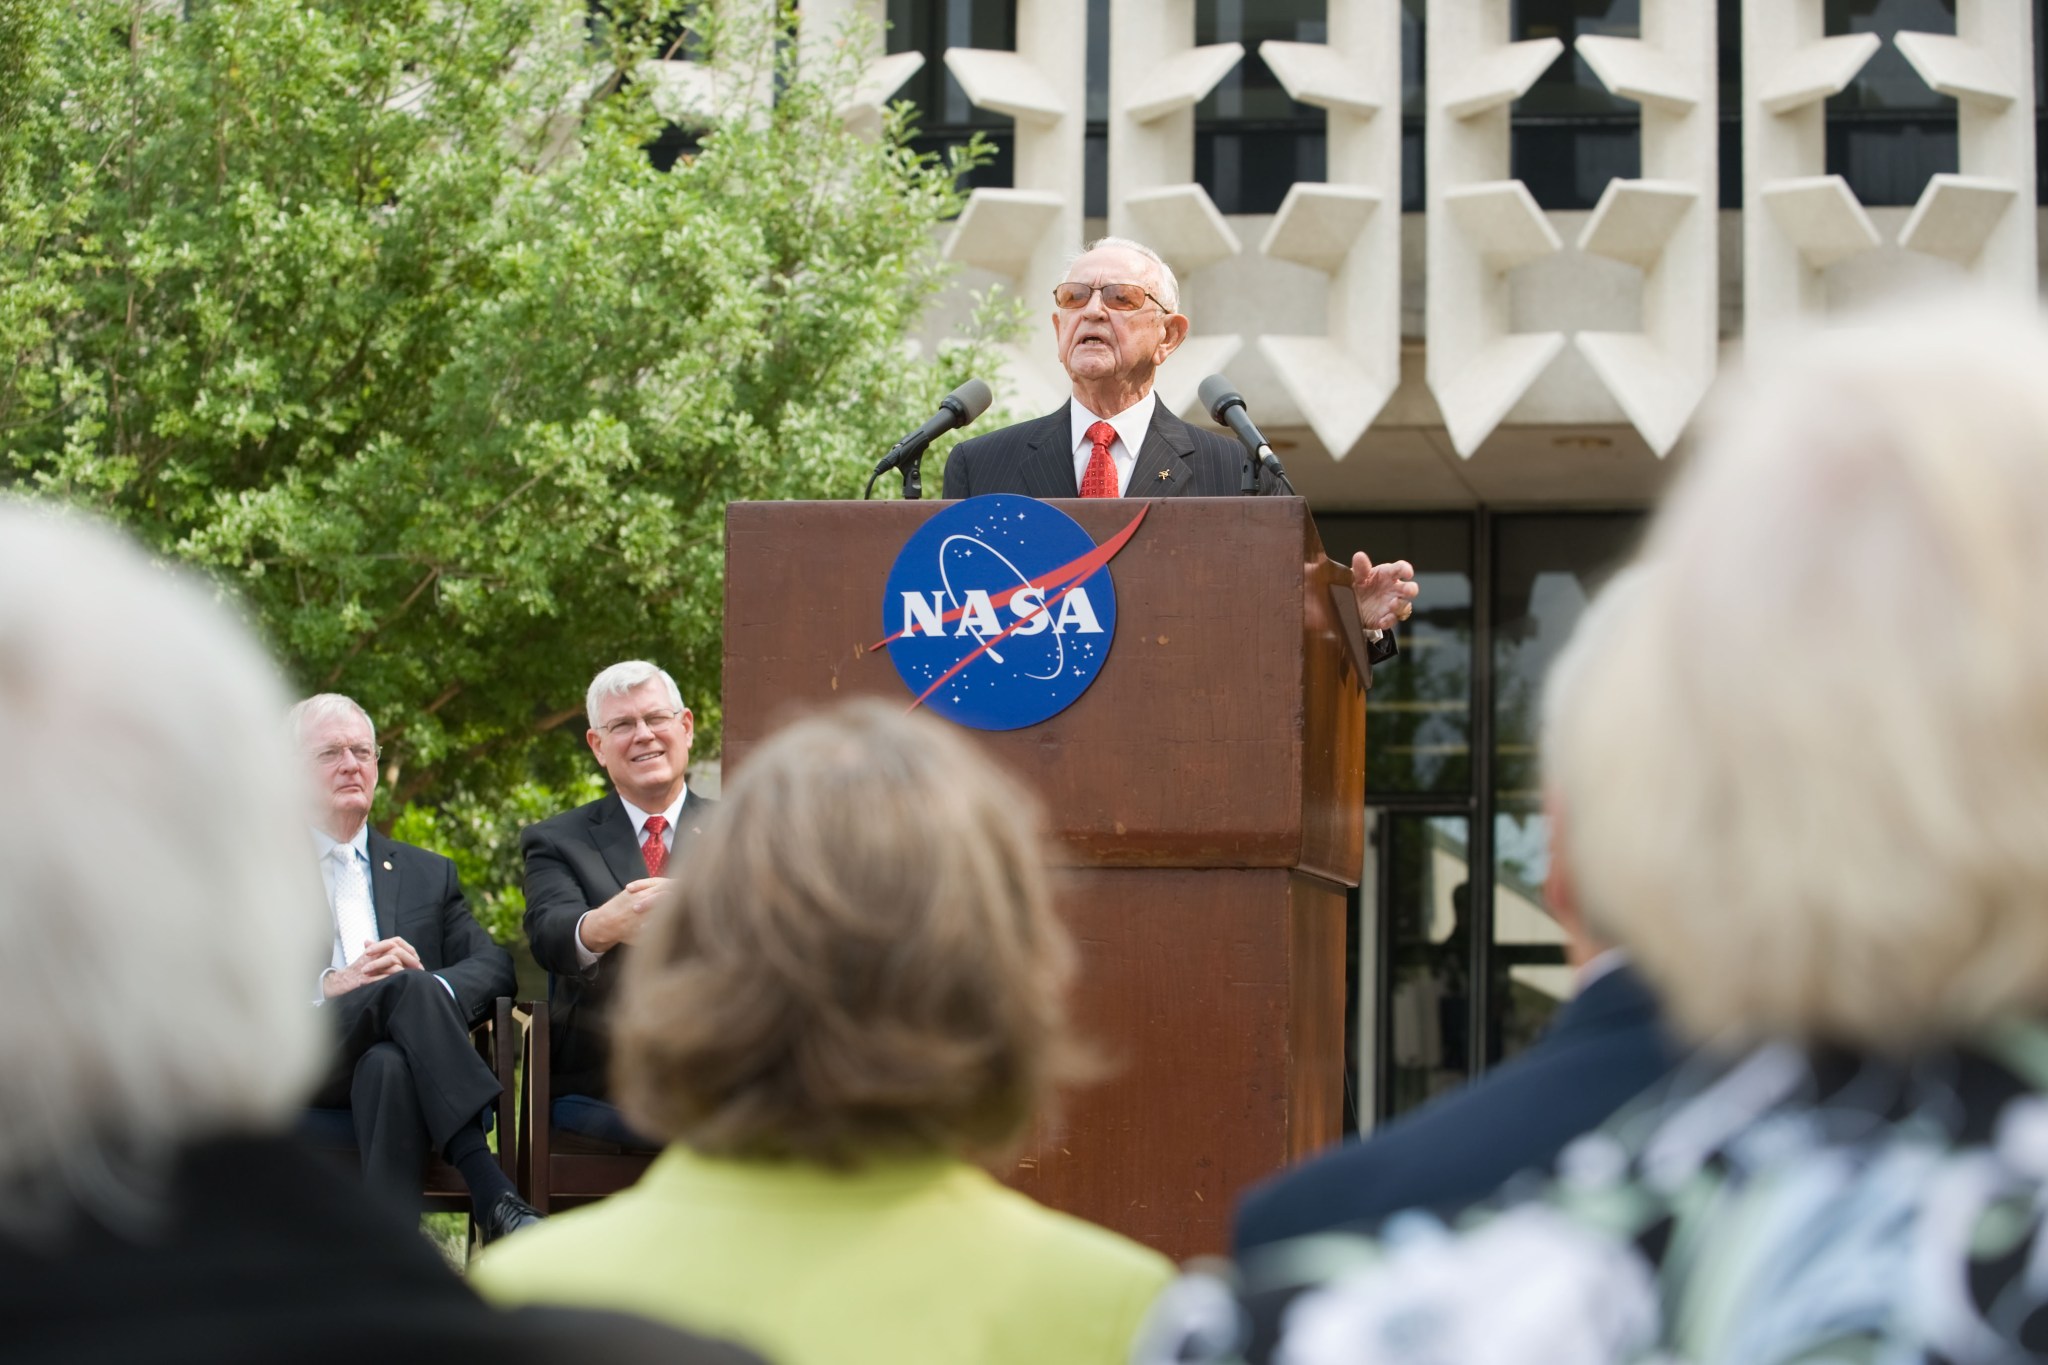 Former Center Director, Chris Kraft, at a podium in front of the newly dedicated Christopher C. Kraft, Jr. Mission Control Center (Bldg. 30) at Johnson Space Center in Houston.